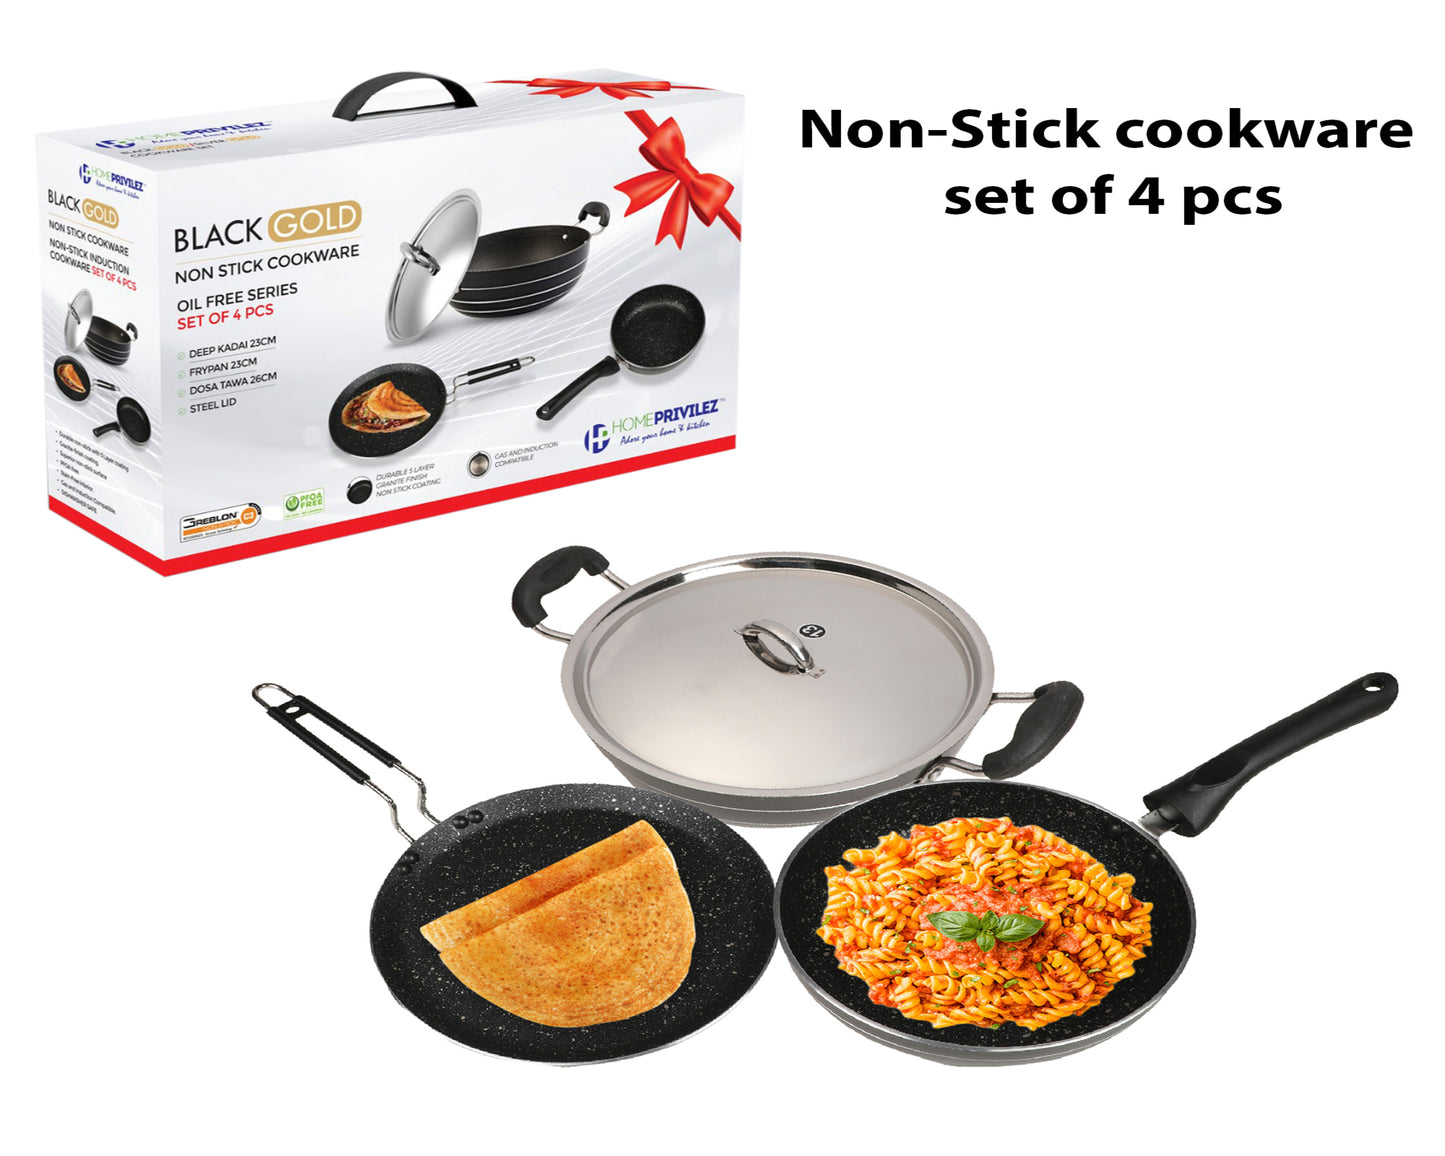 Non-stick Induction Cookware with 5-layer Granite coating (set of 3)